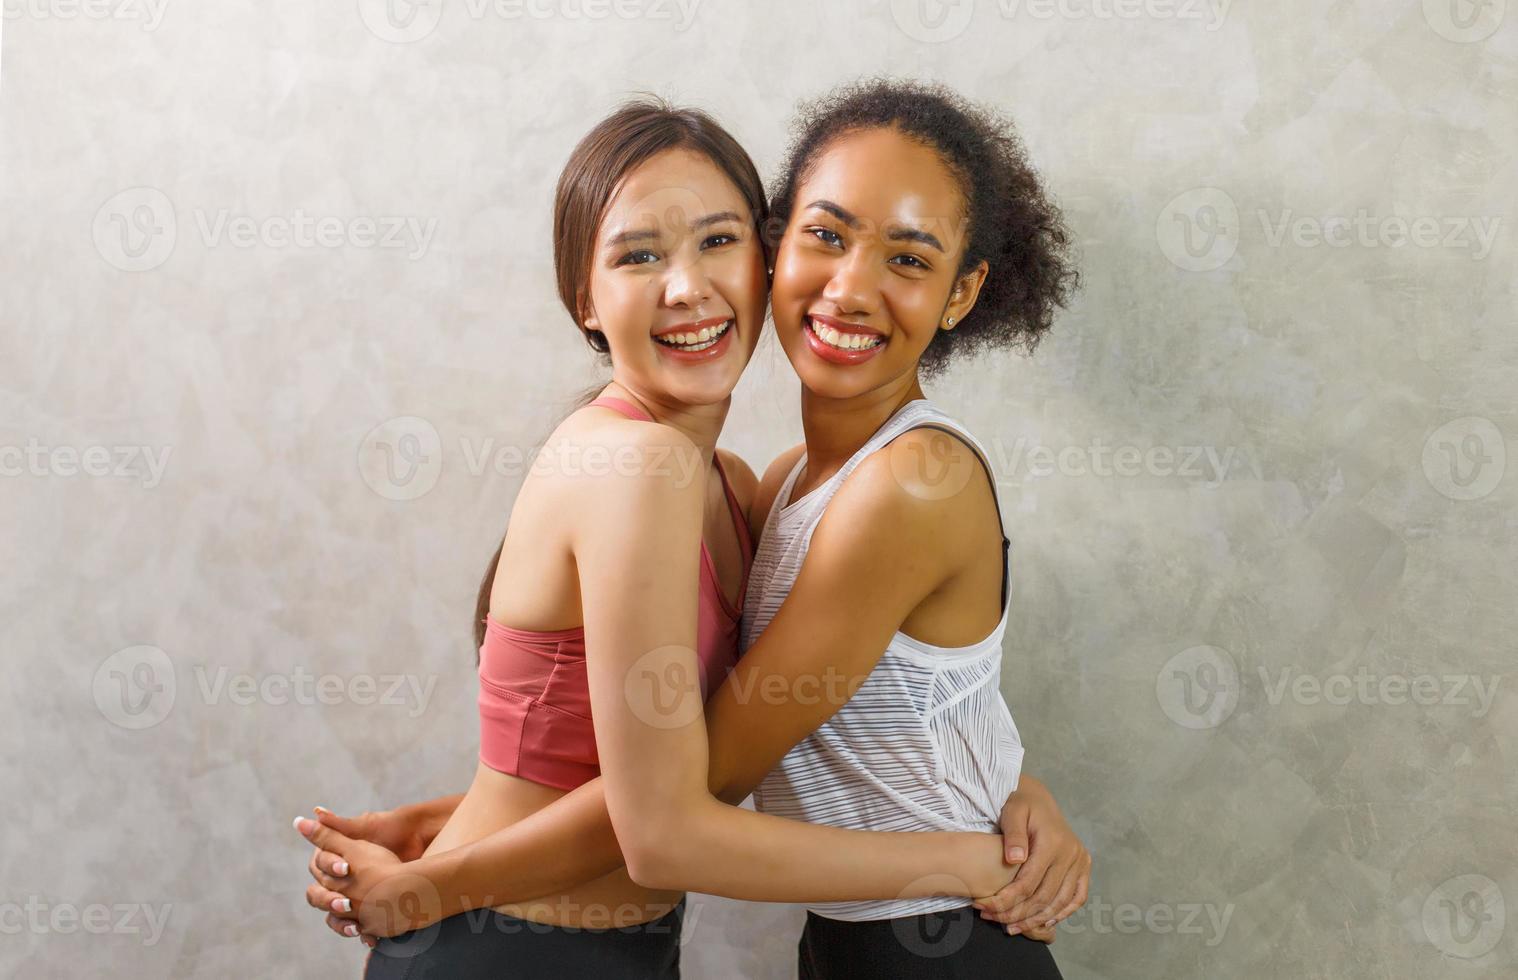 lifestyle portrait of two funny young friends on sportswear have fun and pretending faces. Home party mood. International Women's Day. Group of three happy young women having smiling. photo